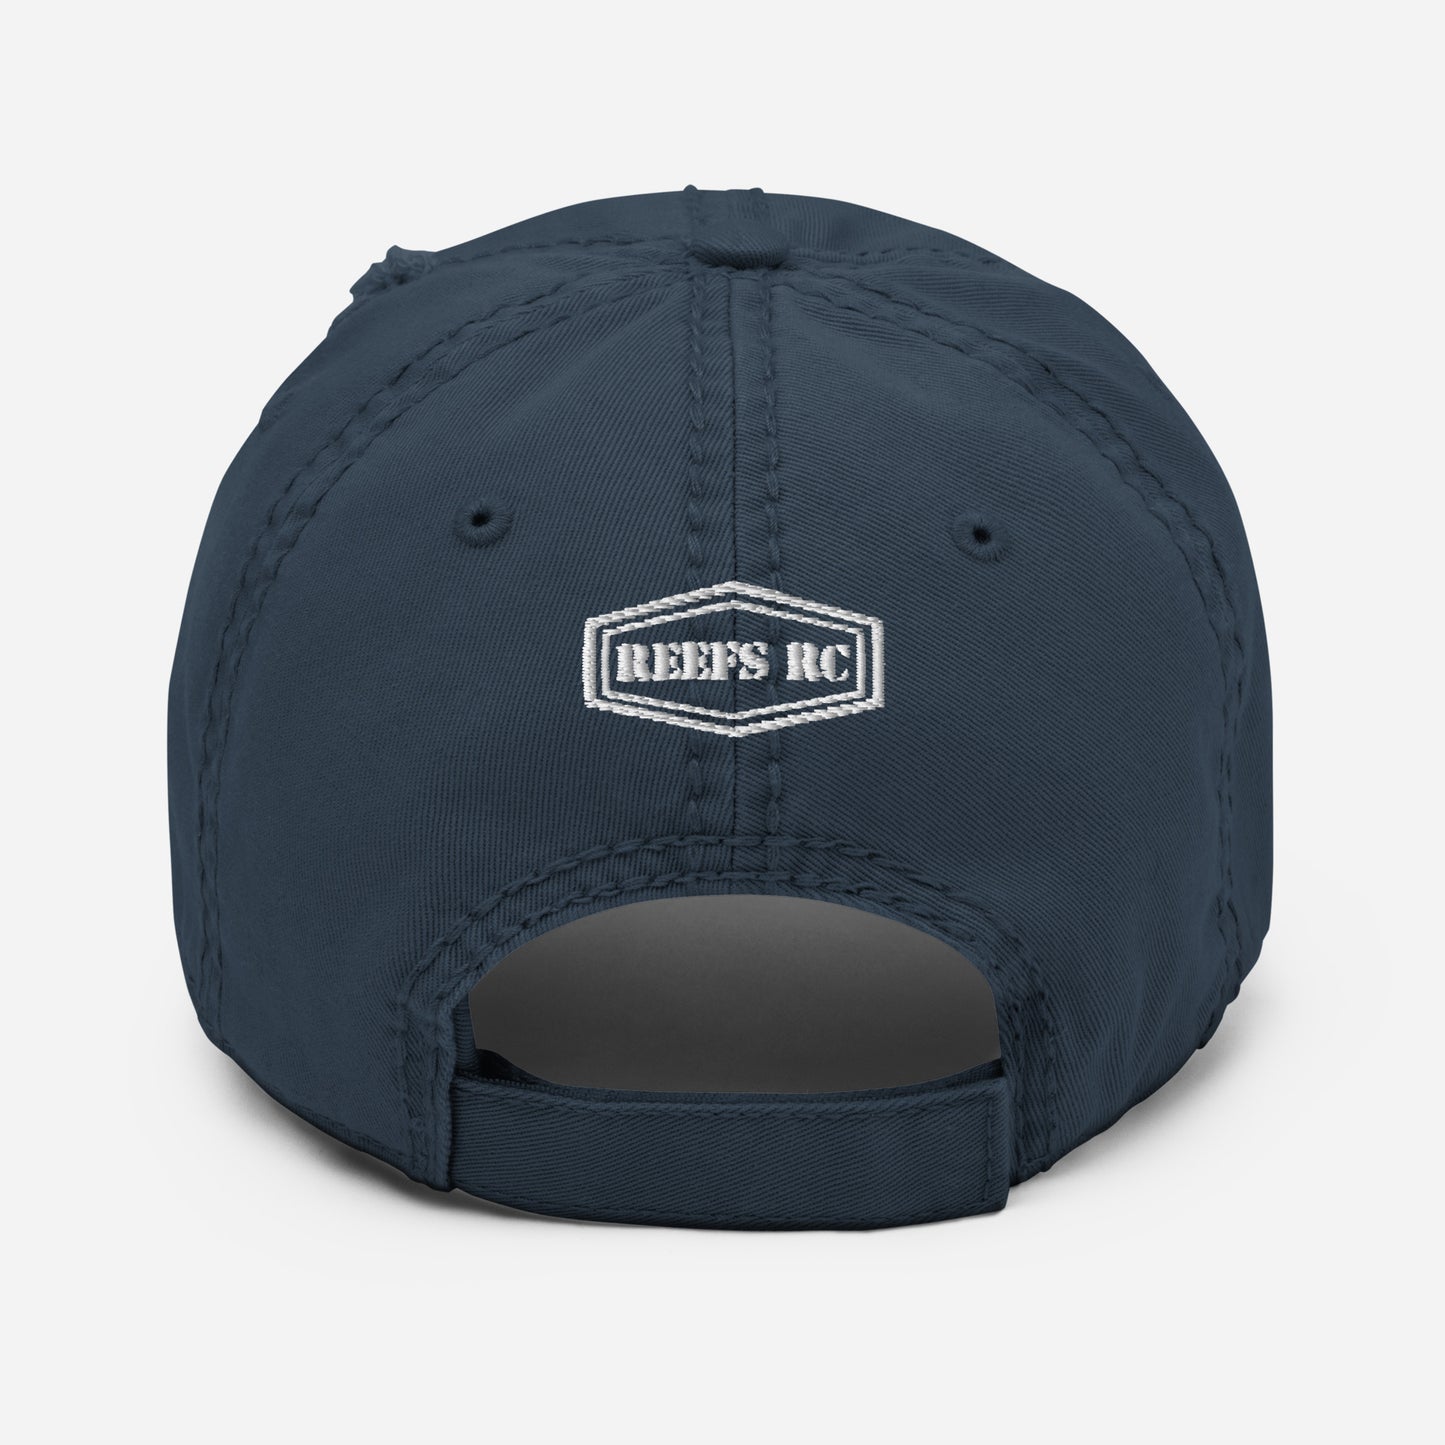 Reefs RC Distressed Dad Hat (Otto)